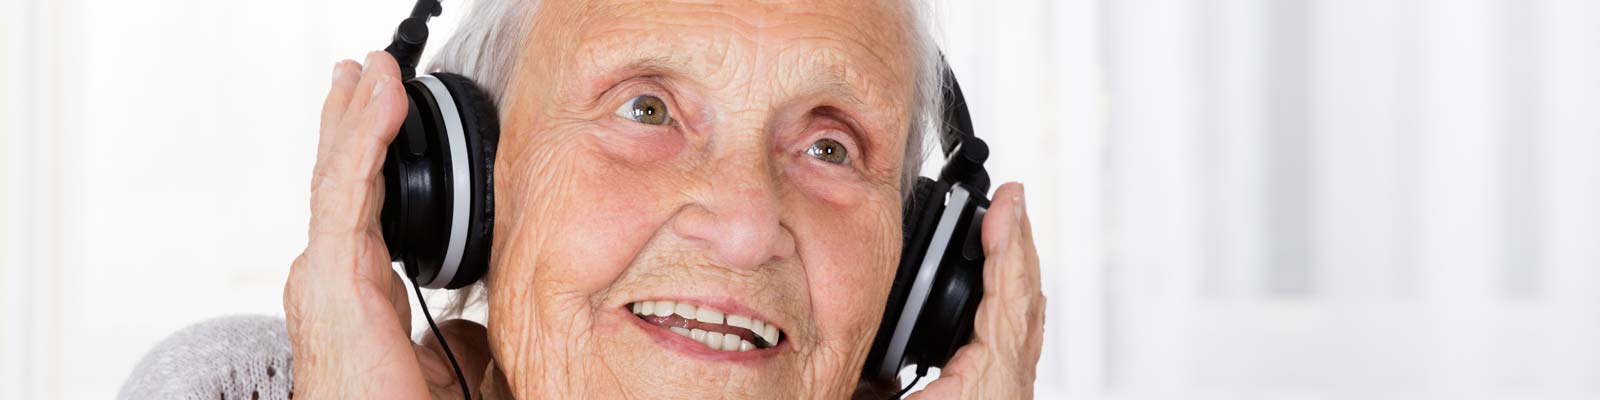 Alzheimer's patient enjoying music - Browse the Alzheimer's Store - The best simple music players and easy to use music related products for those with Alzheimer's, Dementia, Stroke, Memory Loss and for Senior Care